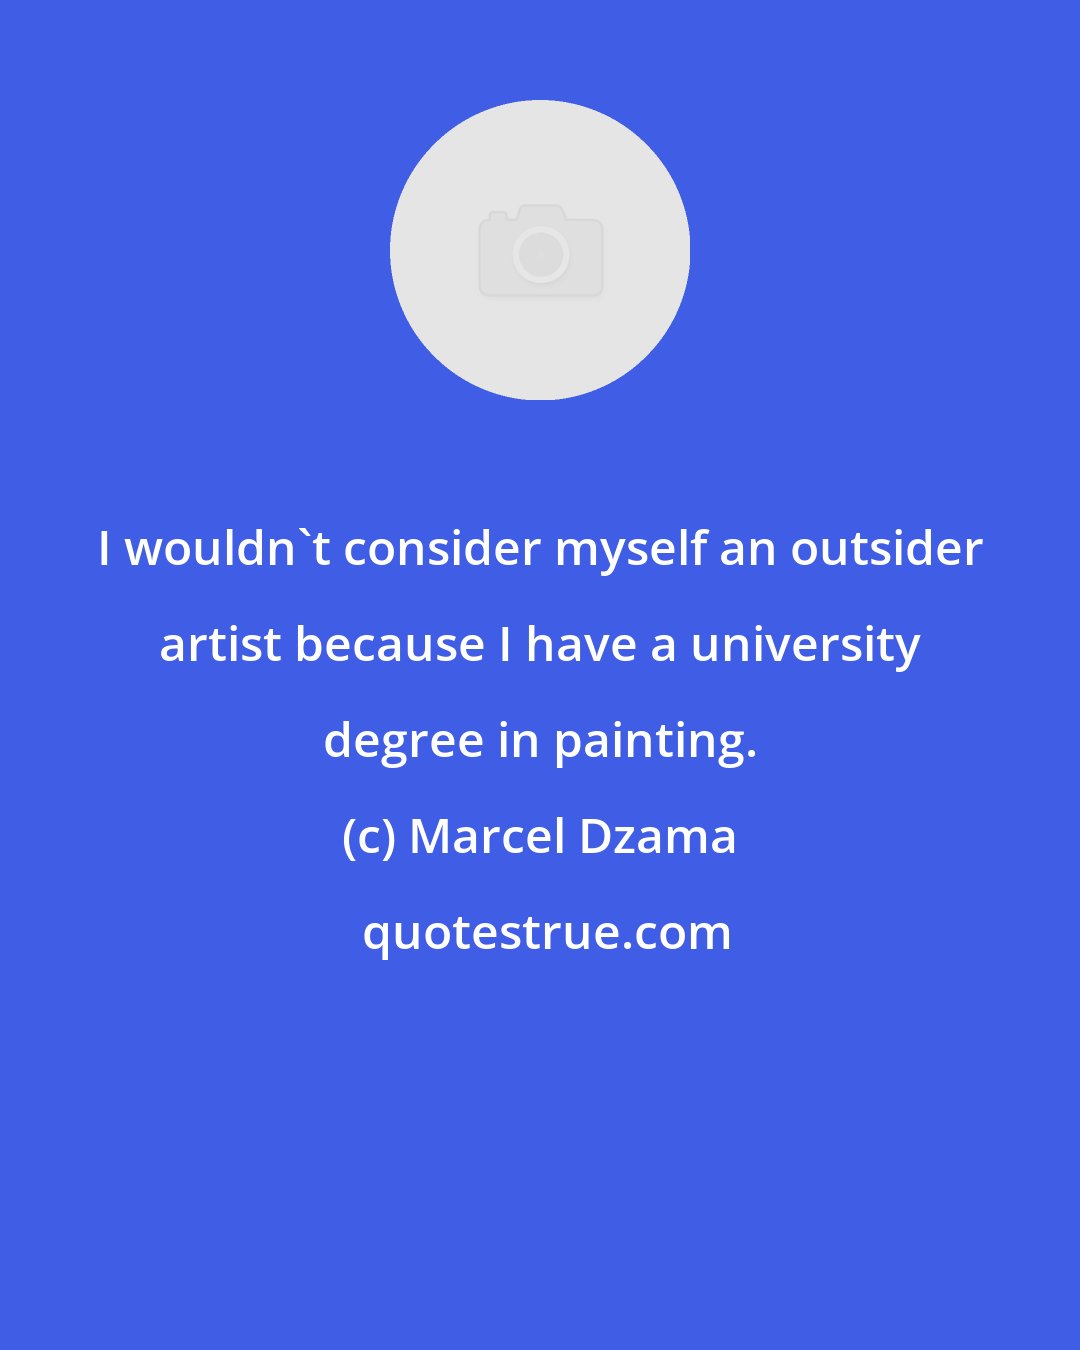 Marcel Dzama: I wouldn't consider myself an outsider artist because I have a university degree in painting.